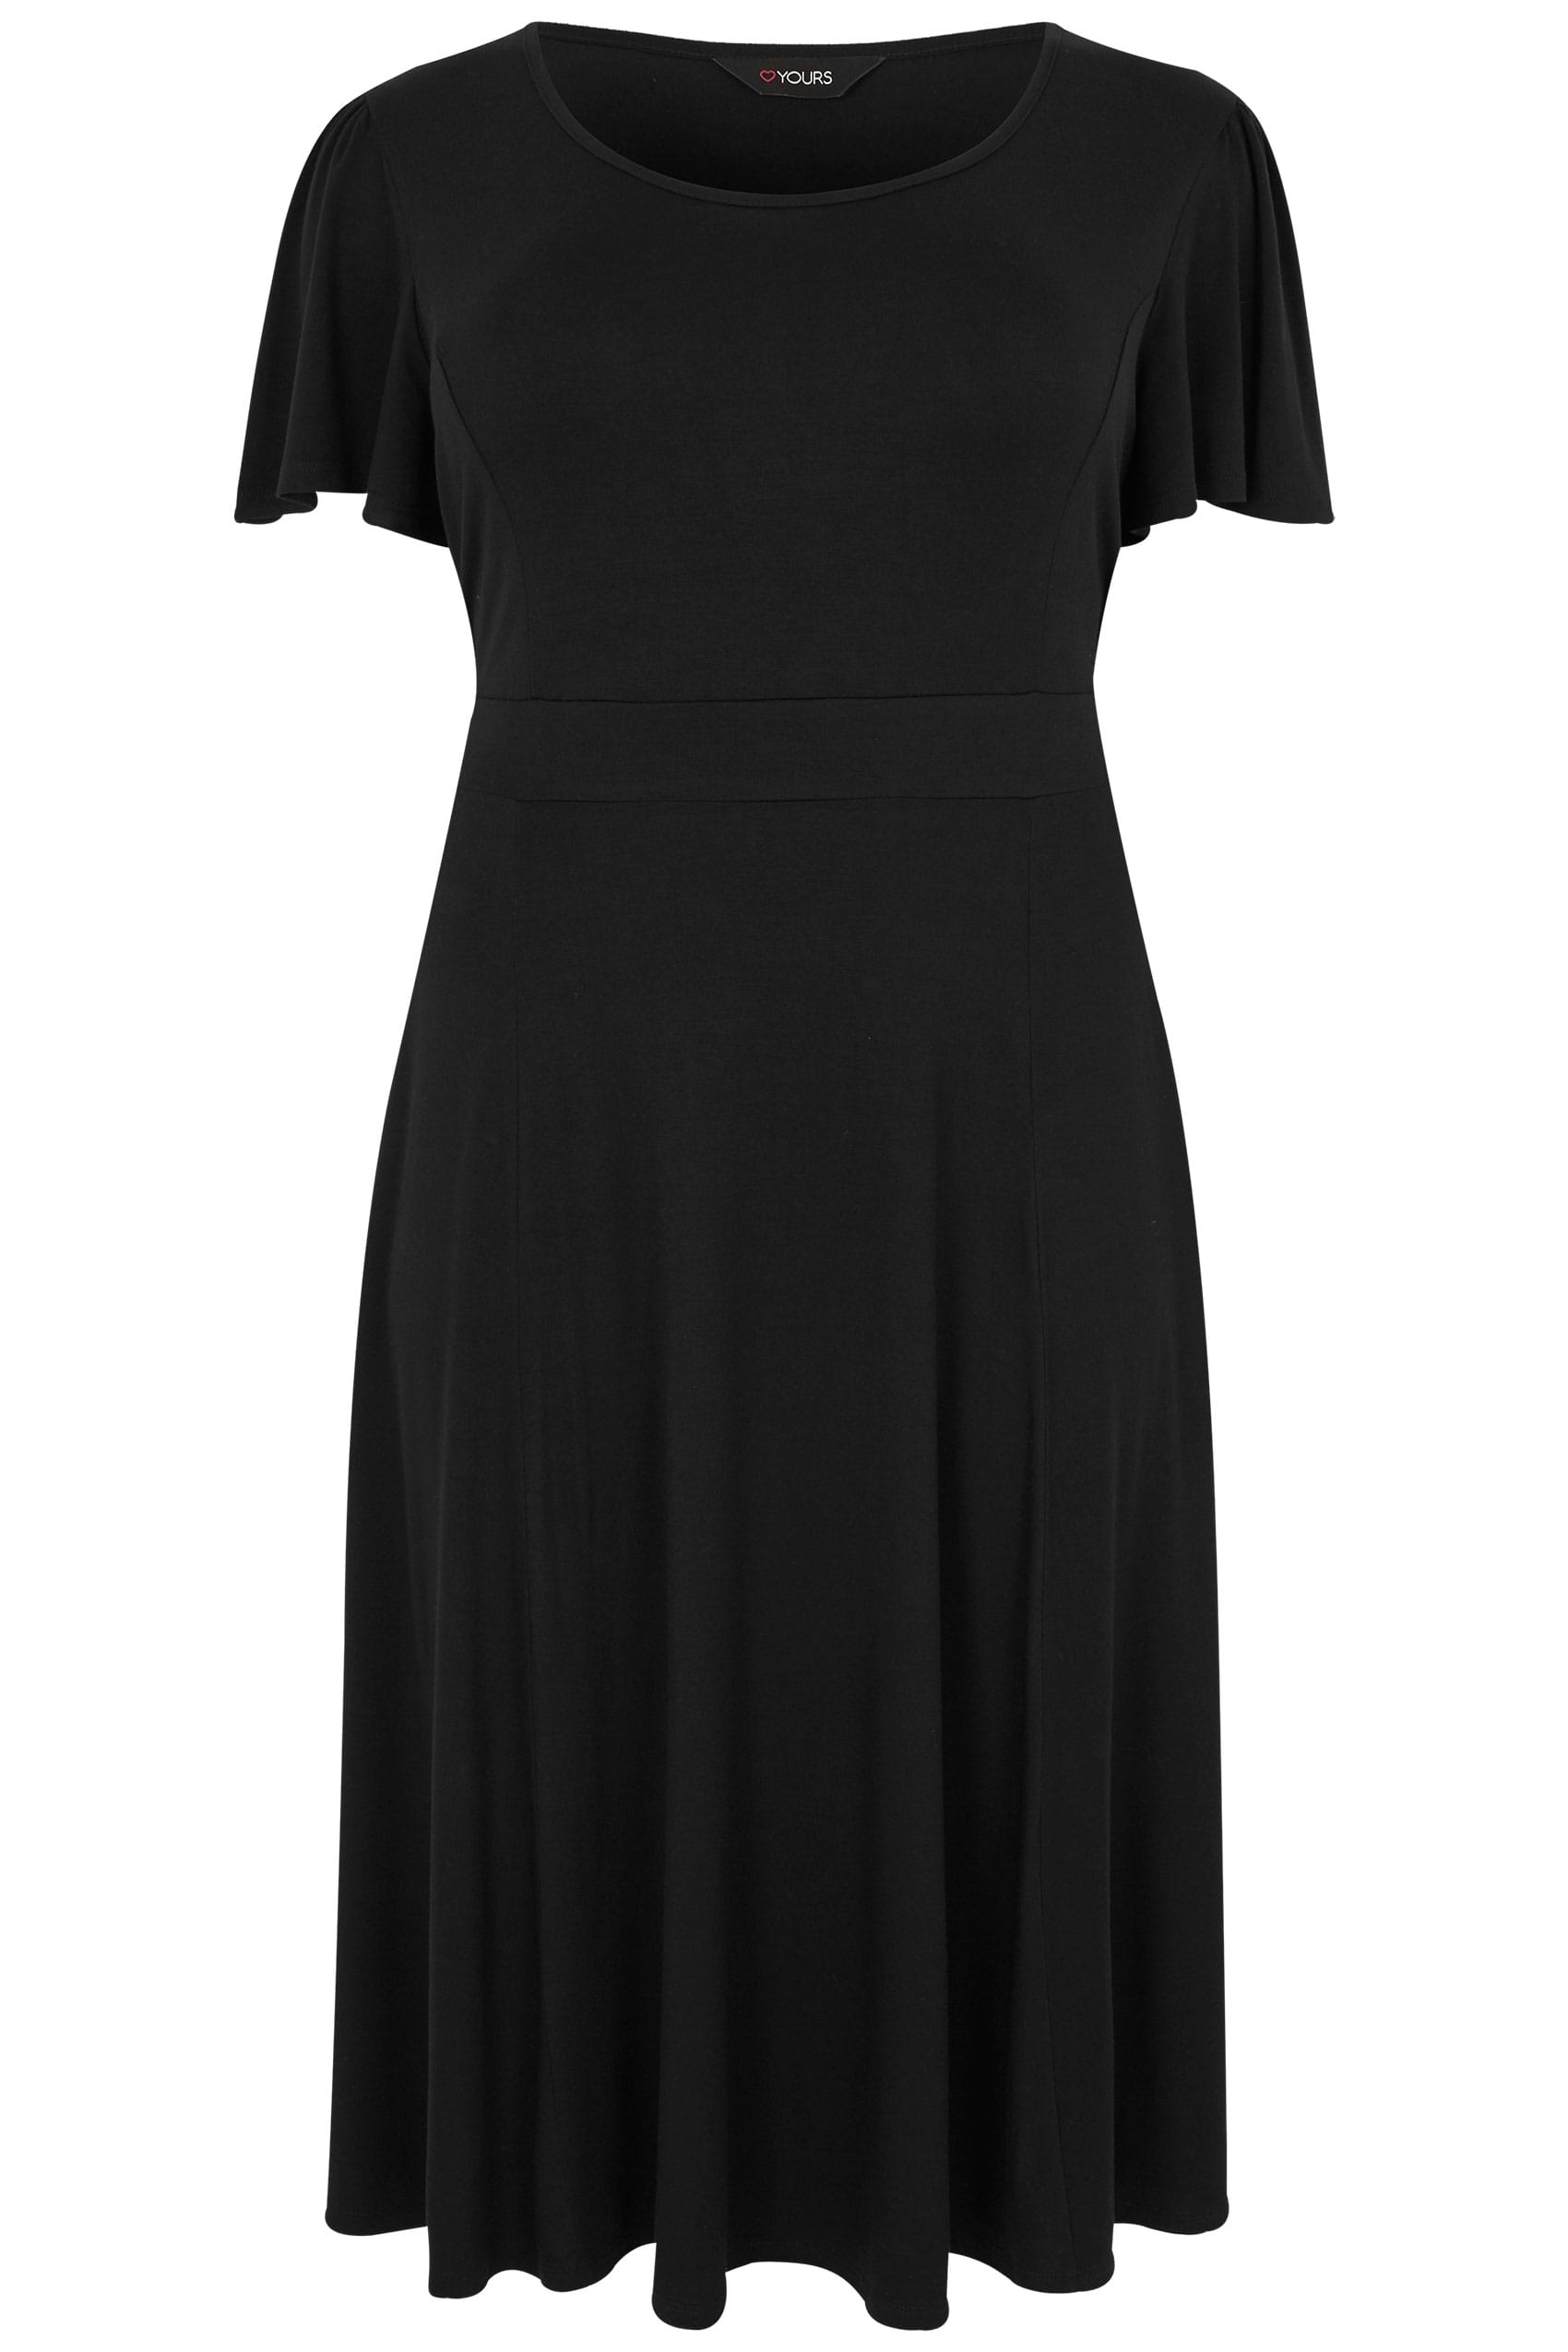 Black Fit & Flare Skater Dress With Tie Waist & Flute Sleeves, plus ...